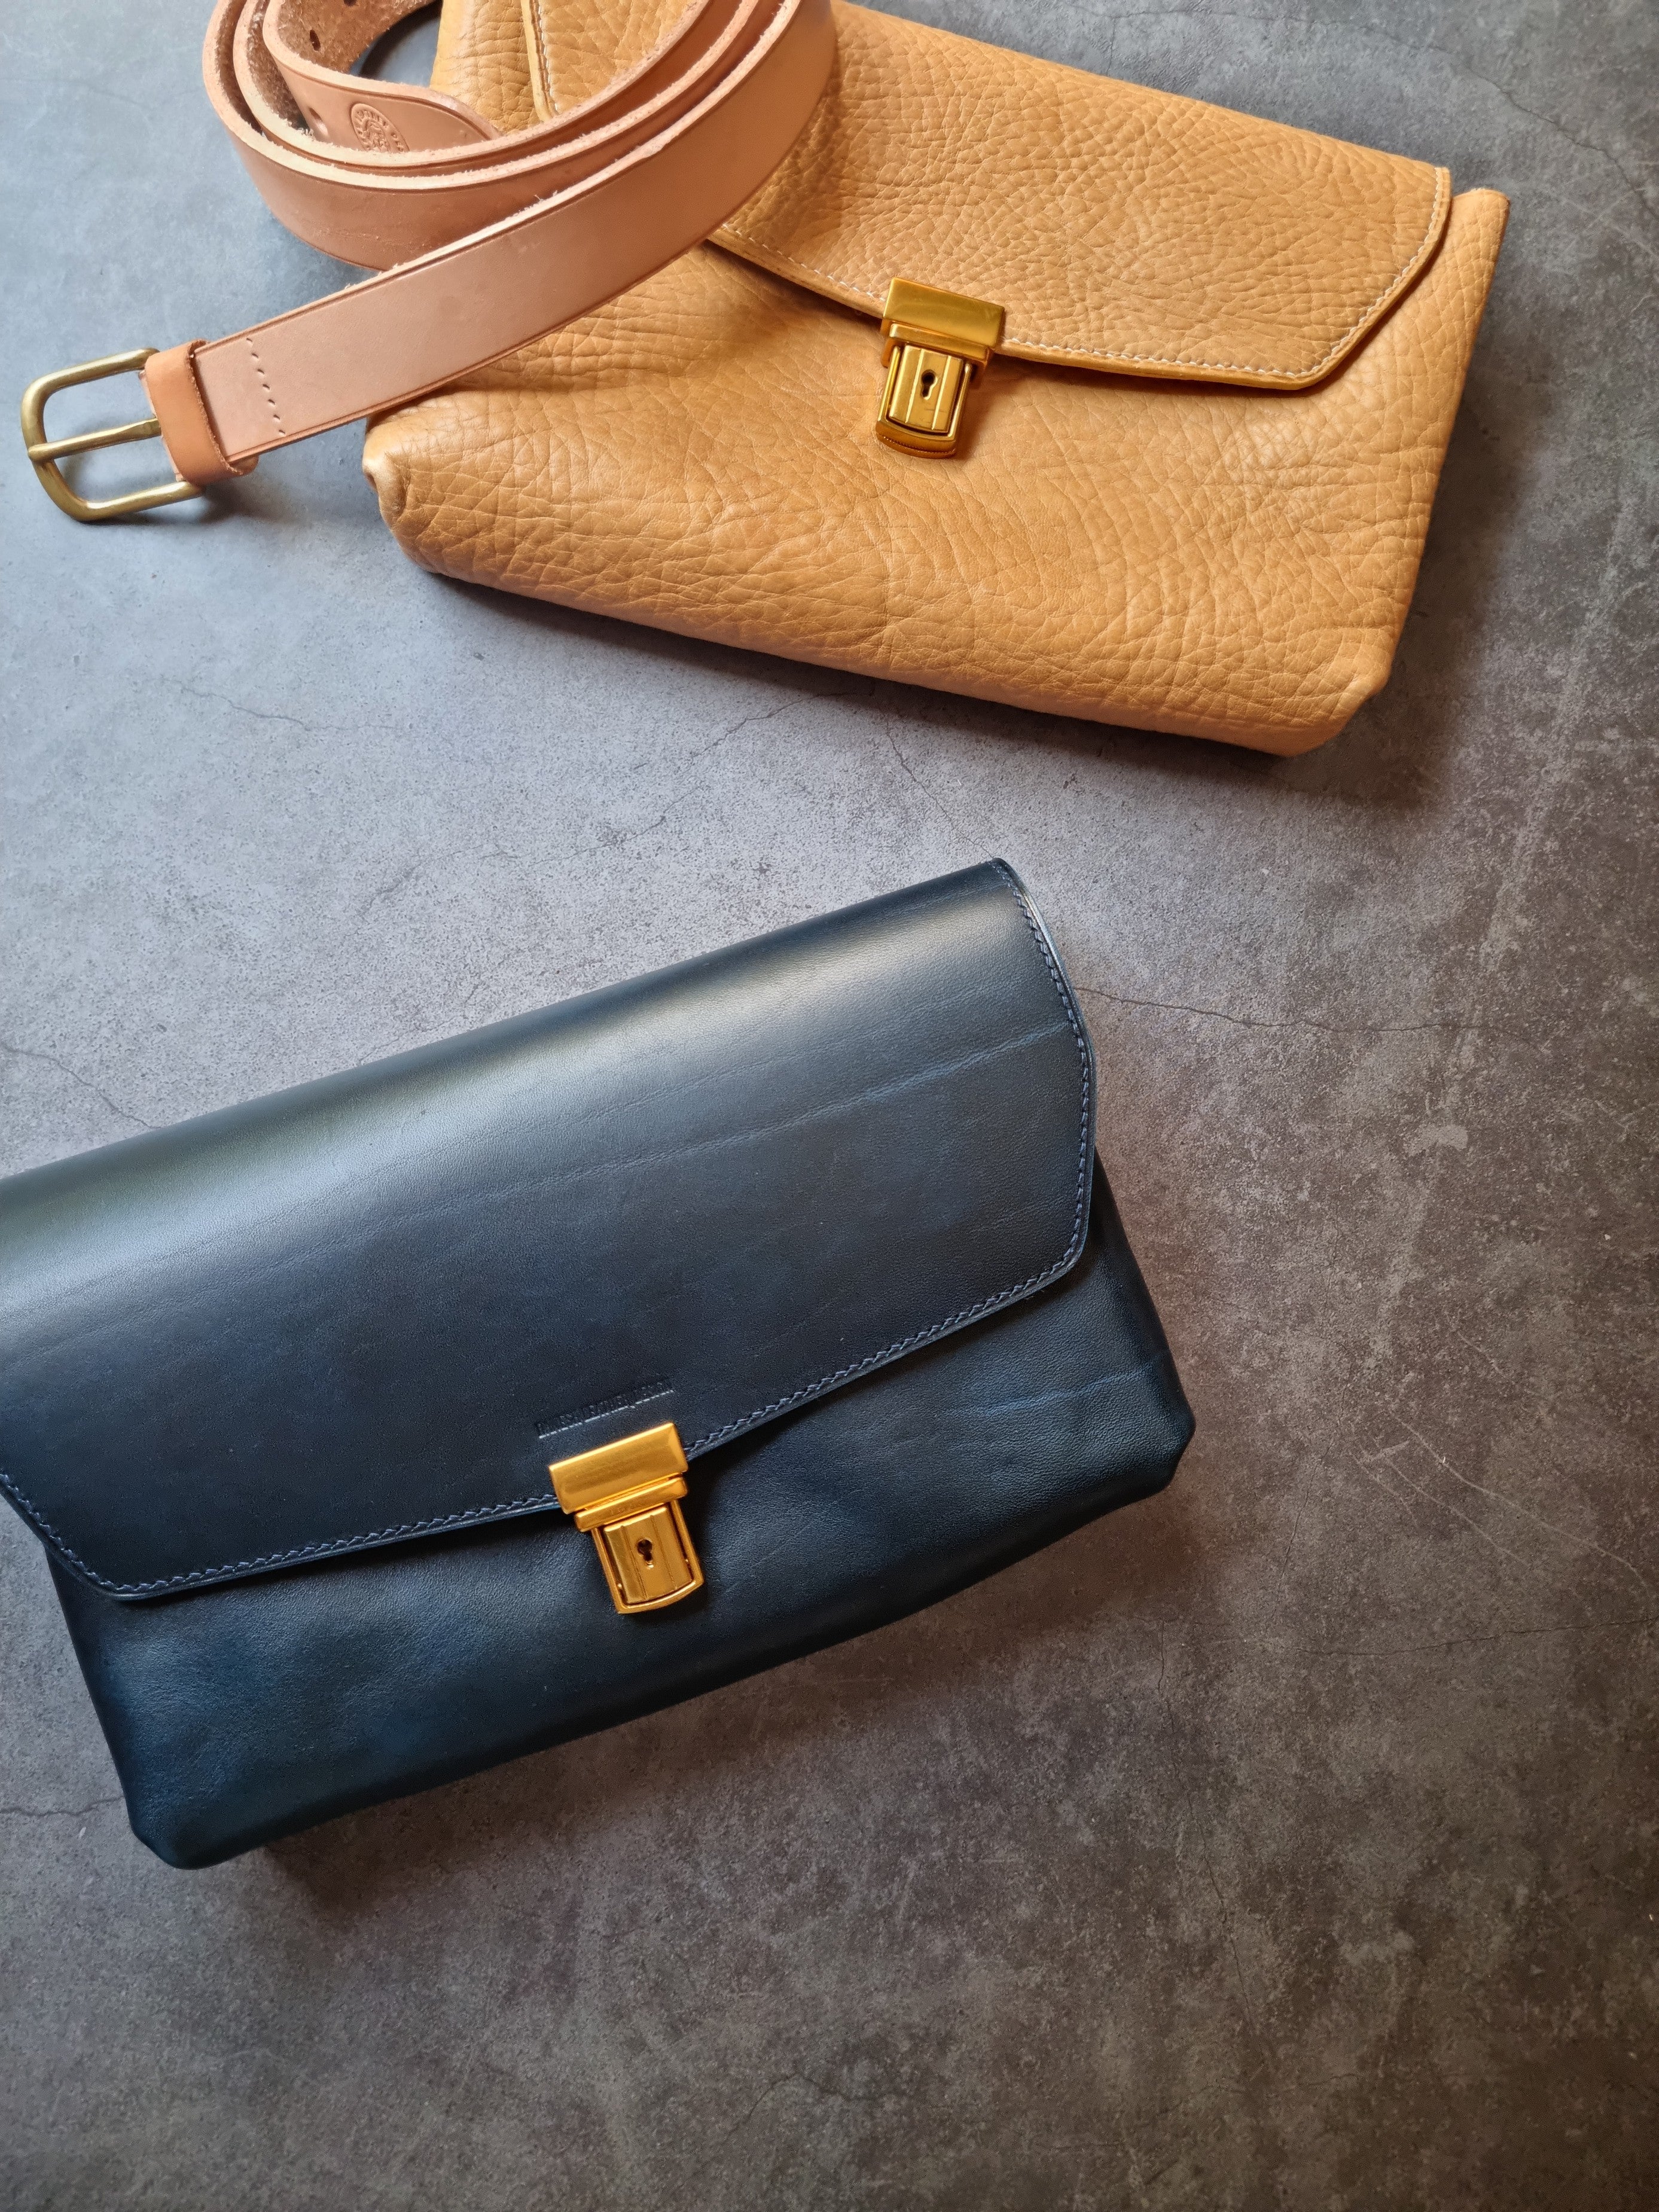 Hand Bags - Latest Trends in Women Accessories